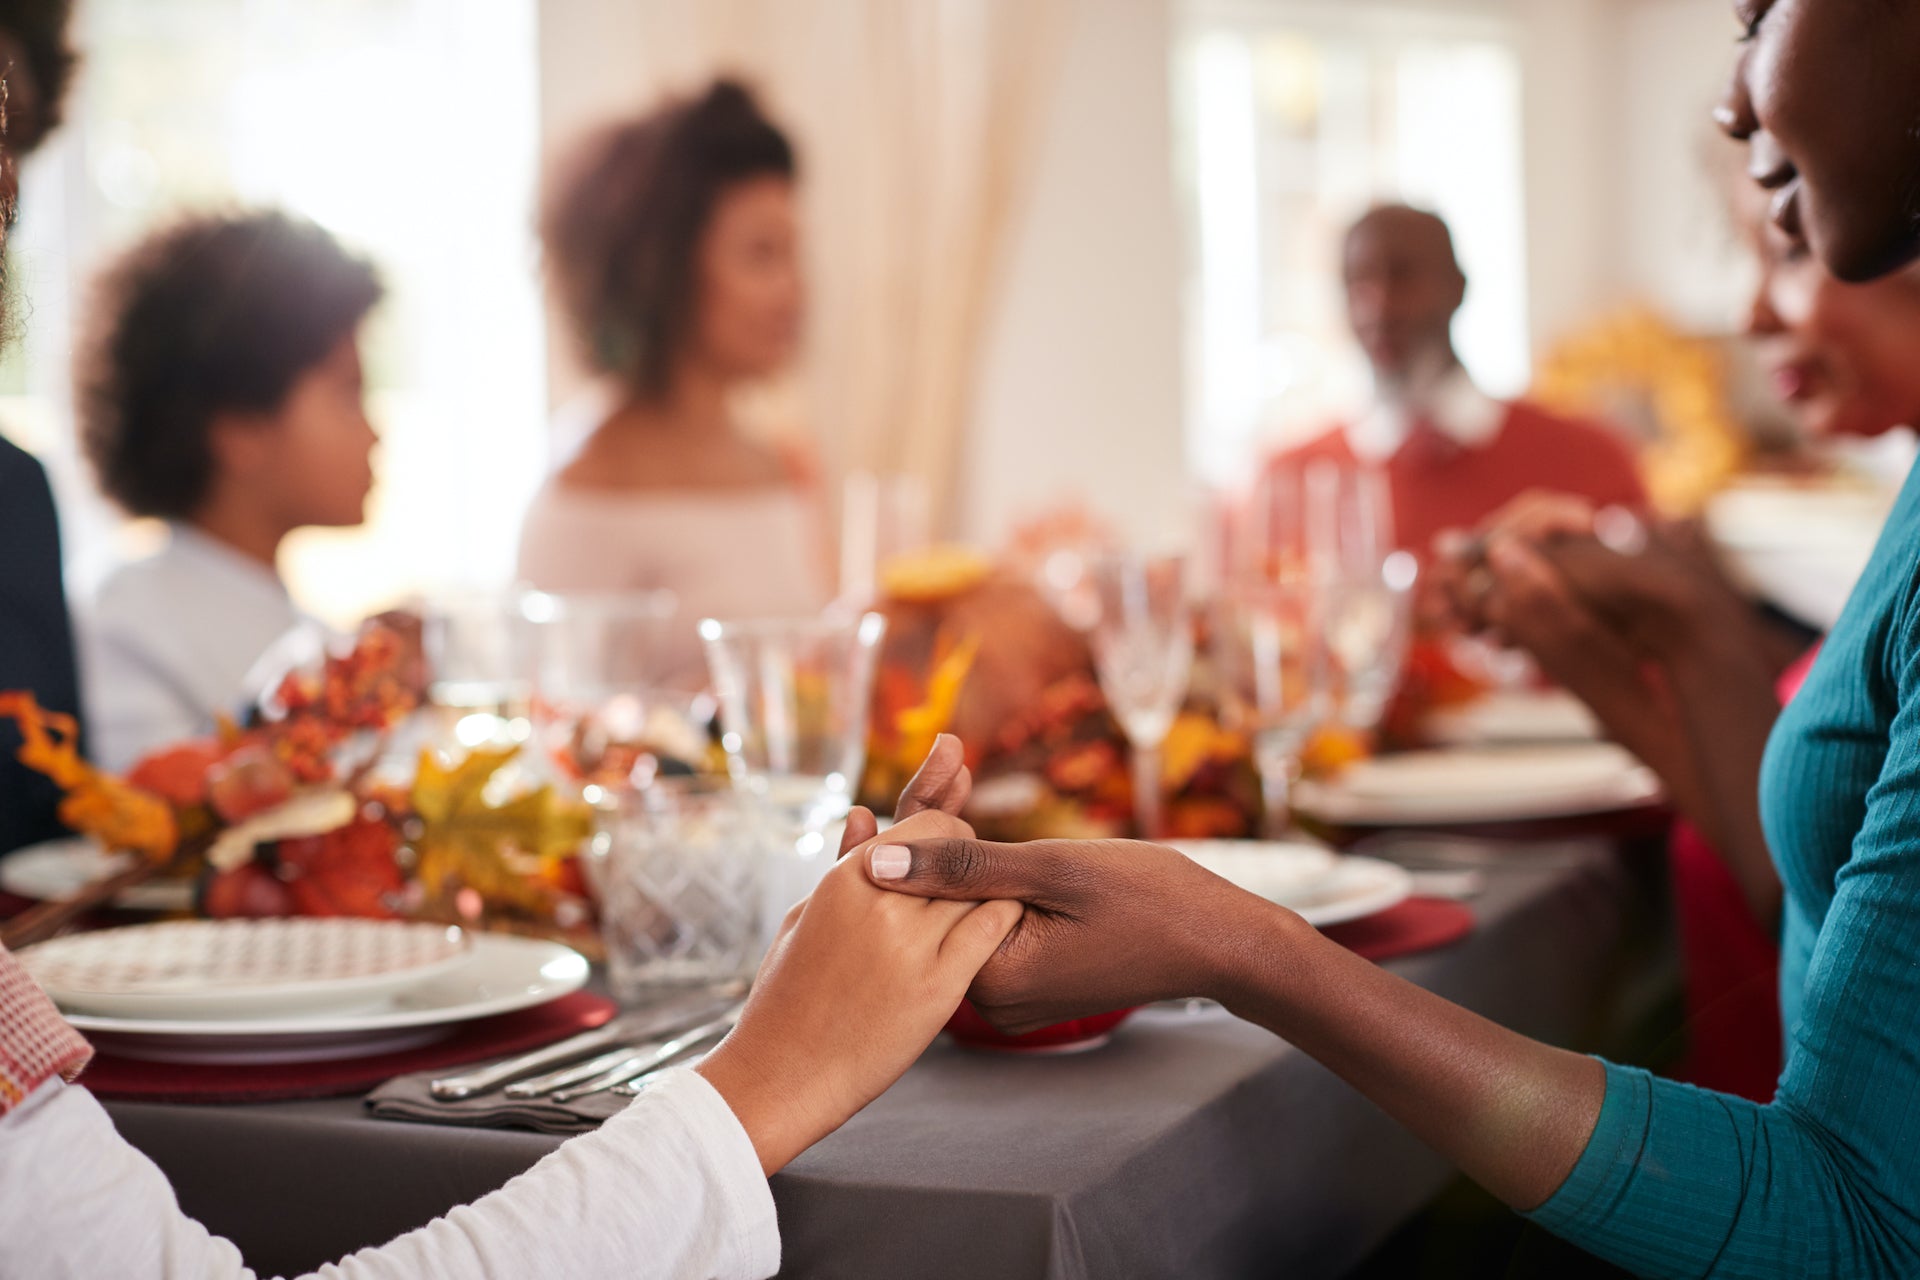 Four Simple Ways to Cultivate a Thankful Heart in Your Children